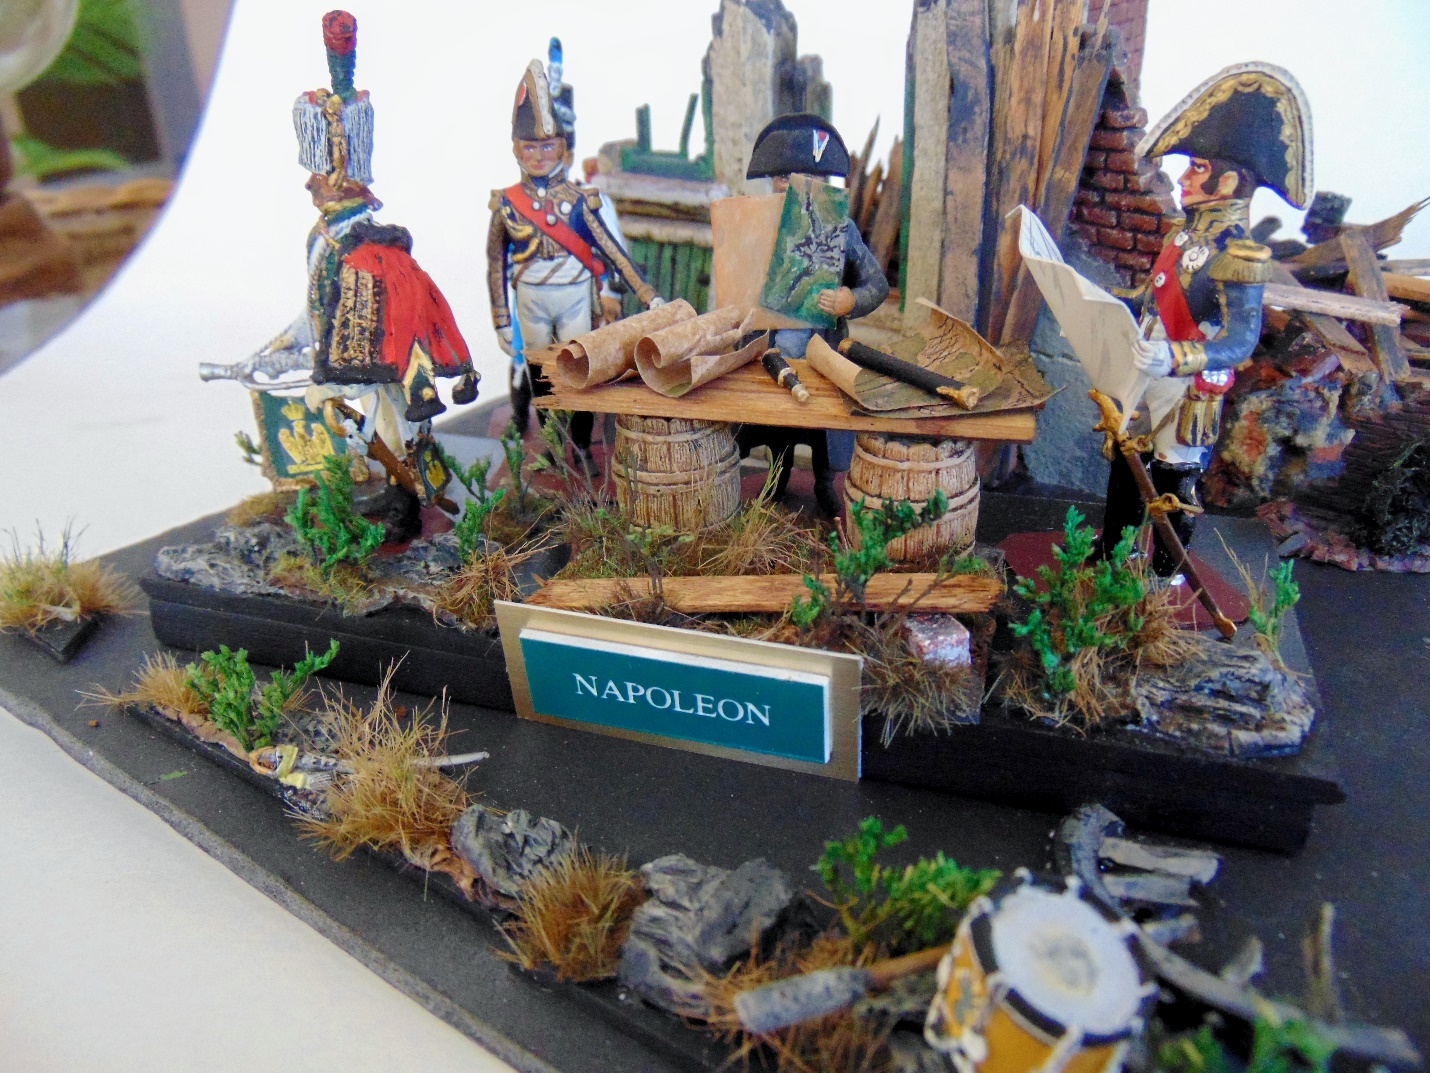 Curt's diorama consists of 54mm Charles Stadden and Metal Models from France.